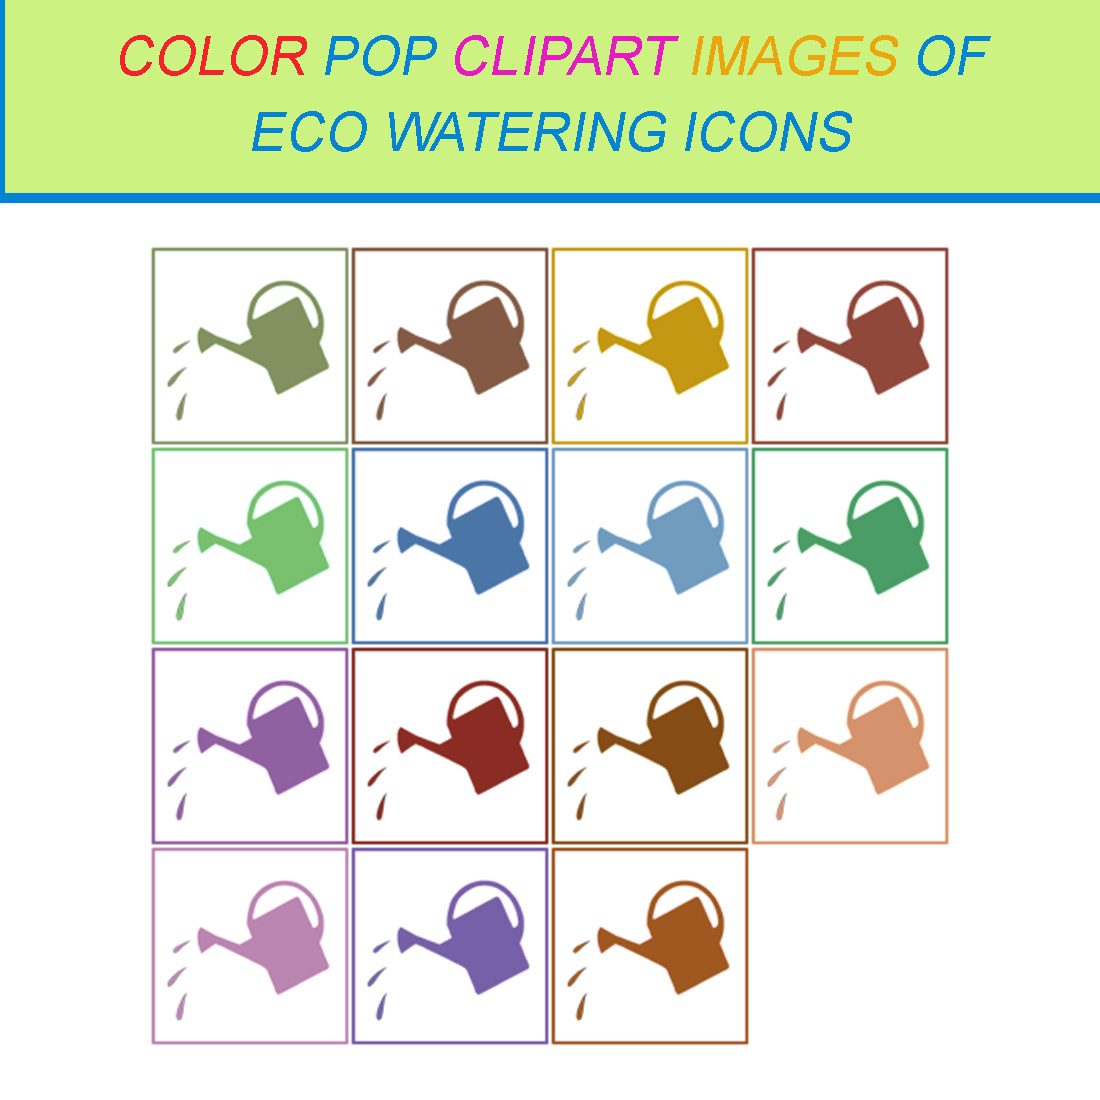 15 COLOR POP CLIPART IMAGES OF ECO WATERING ICONS cover image.